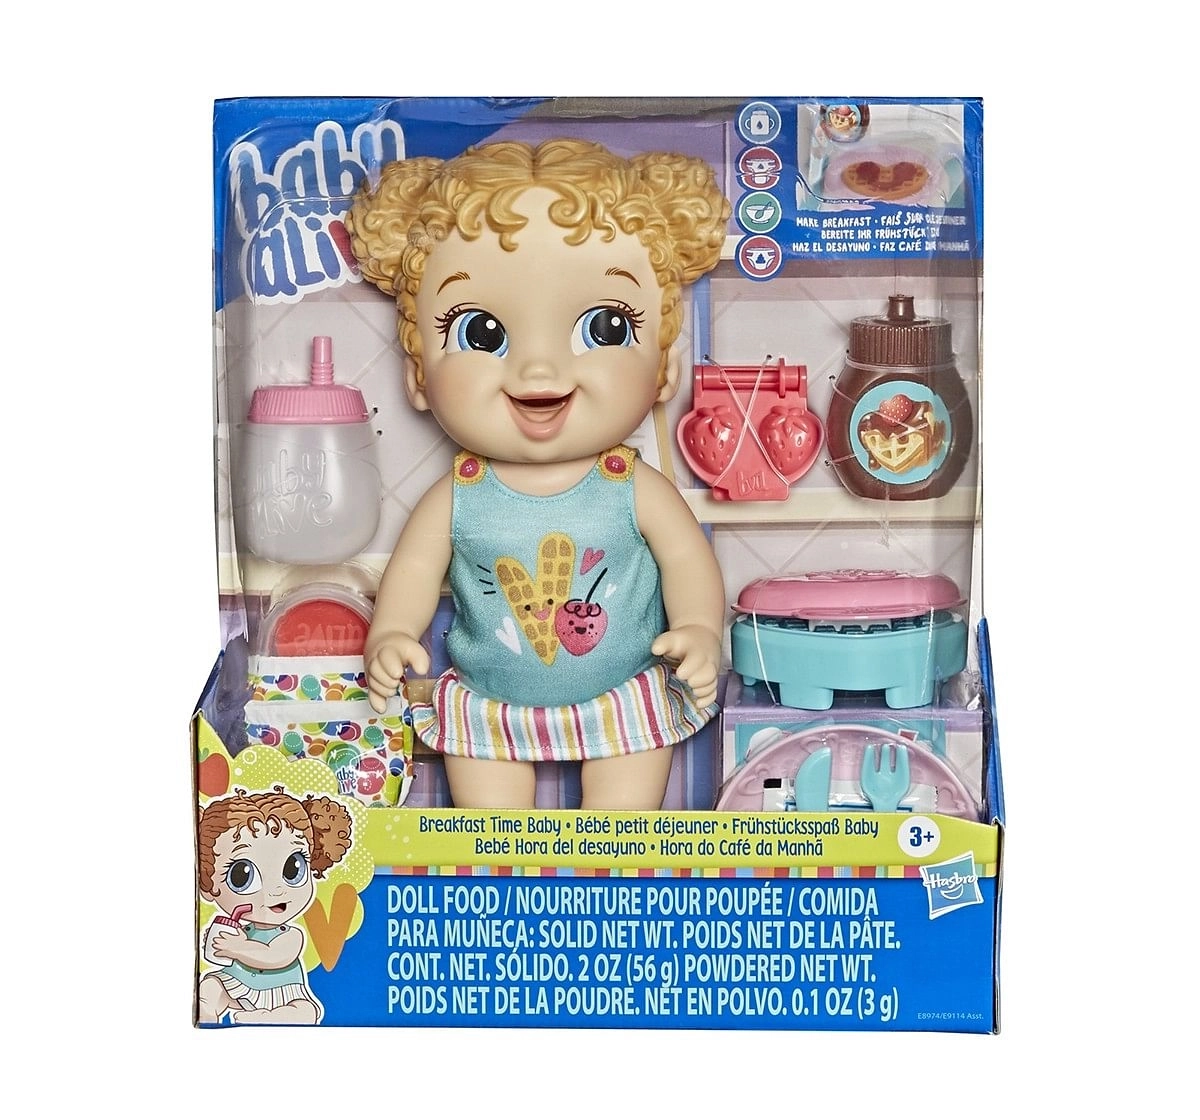 Baby Alive Breakfast Time Baby Doll with Waffle Maker, Accessories, Drinks, Wets, Eats, Blonde Hair Toy for Kids Ages 3 Years and Up 